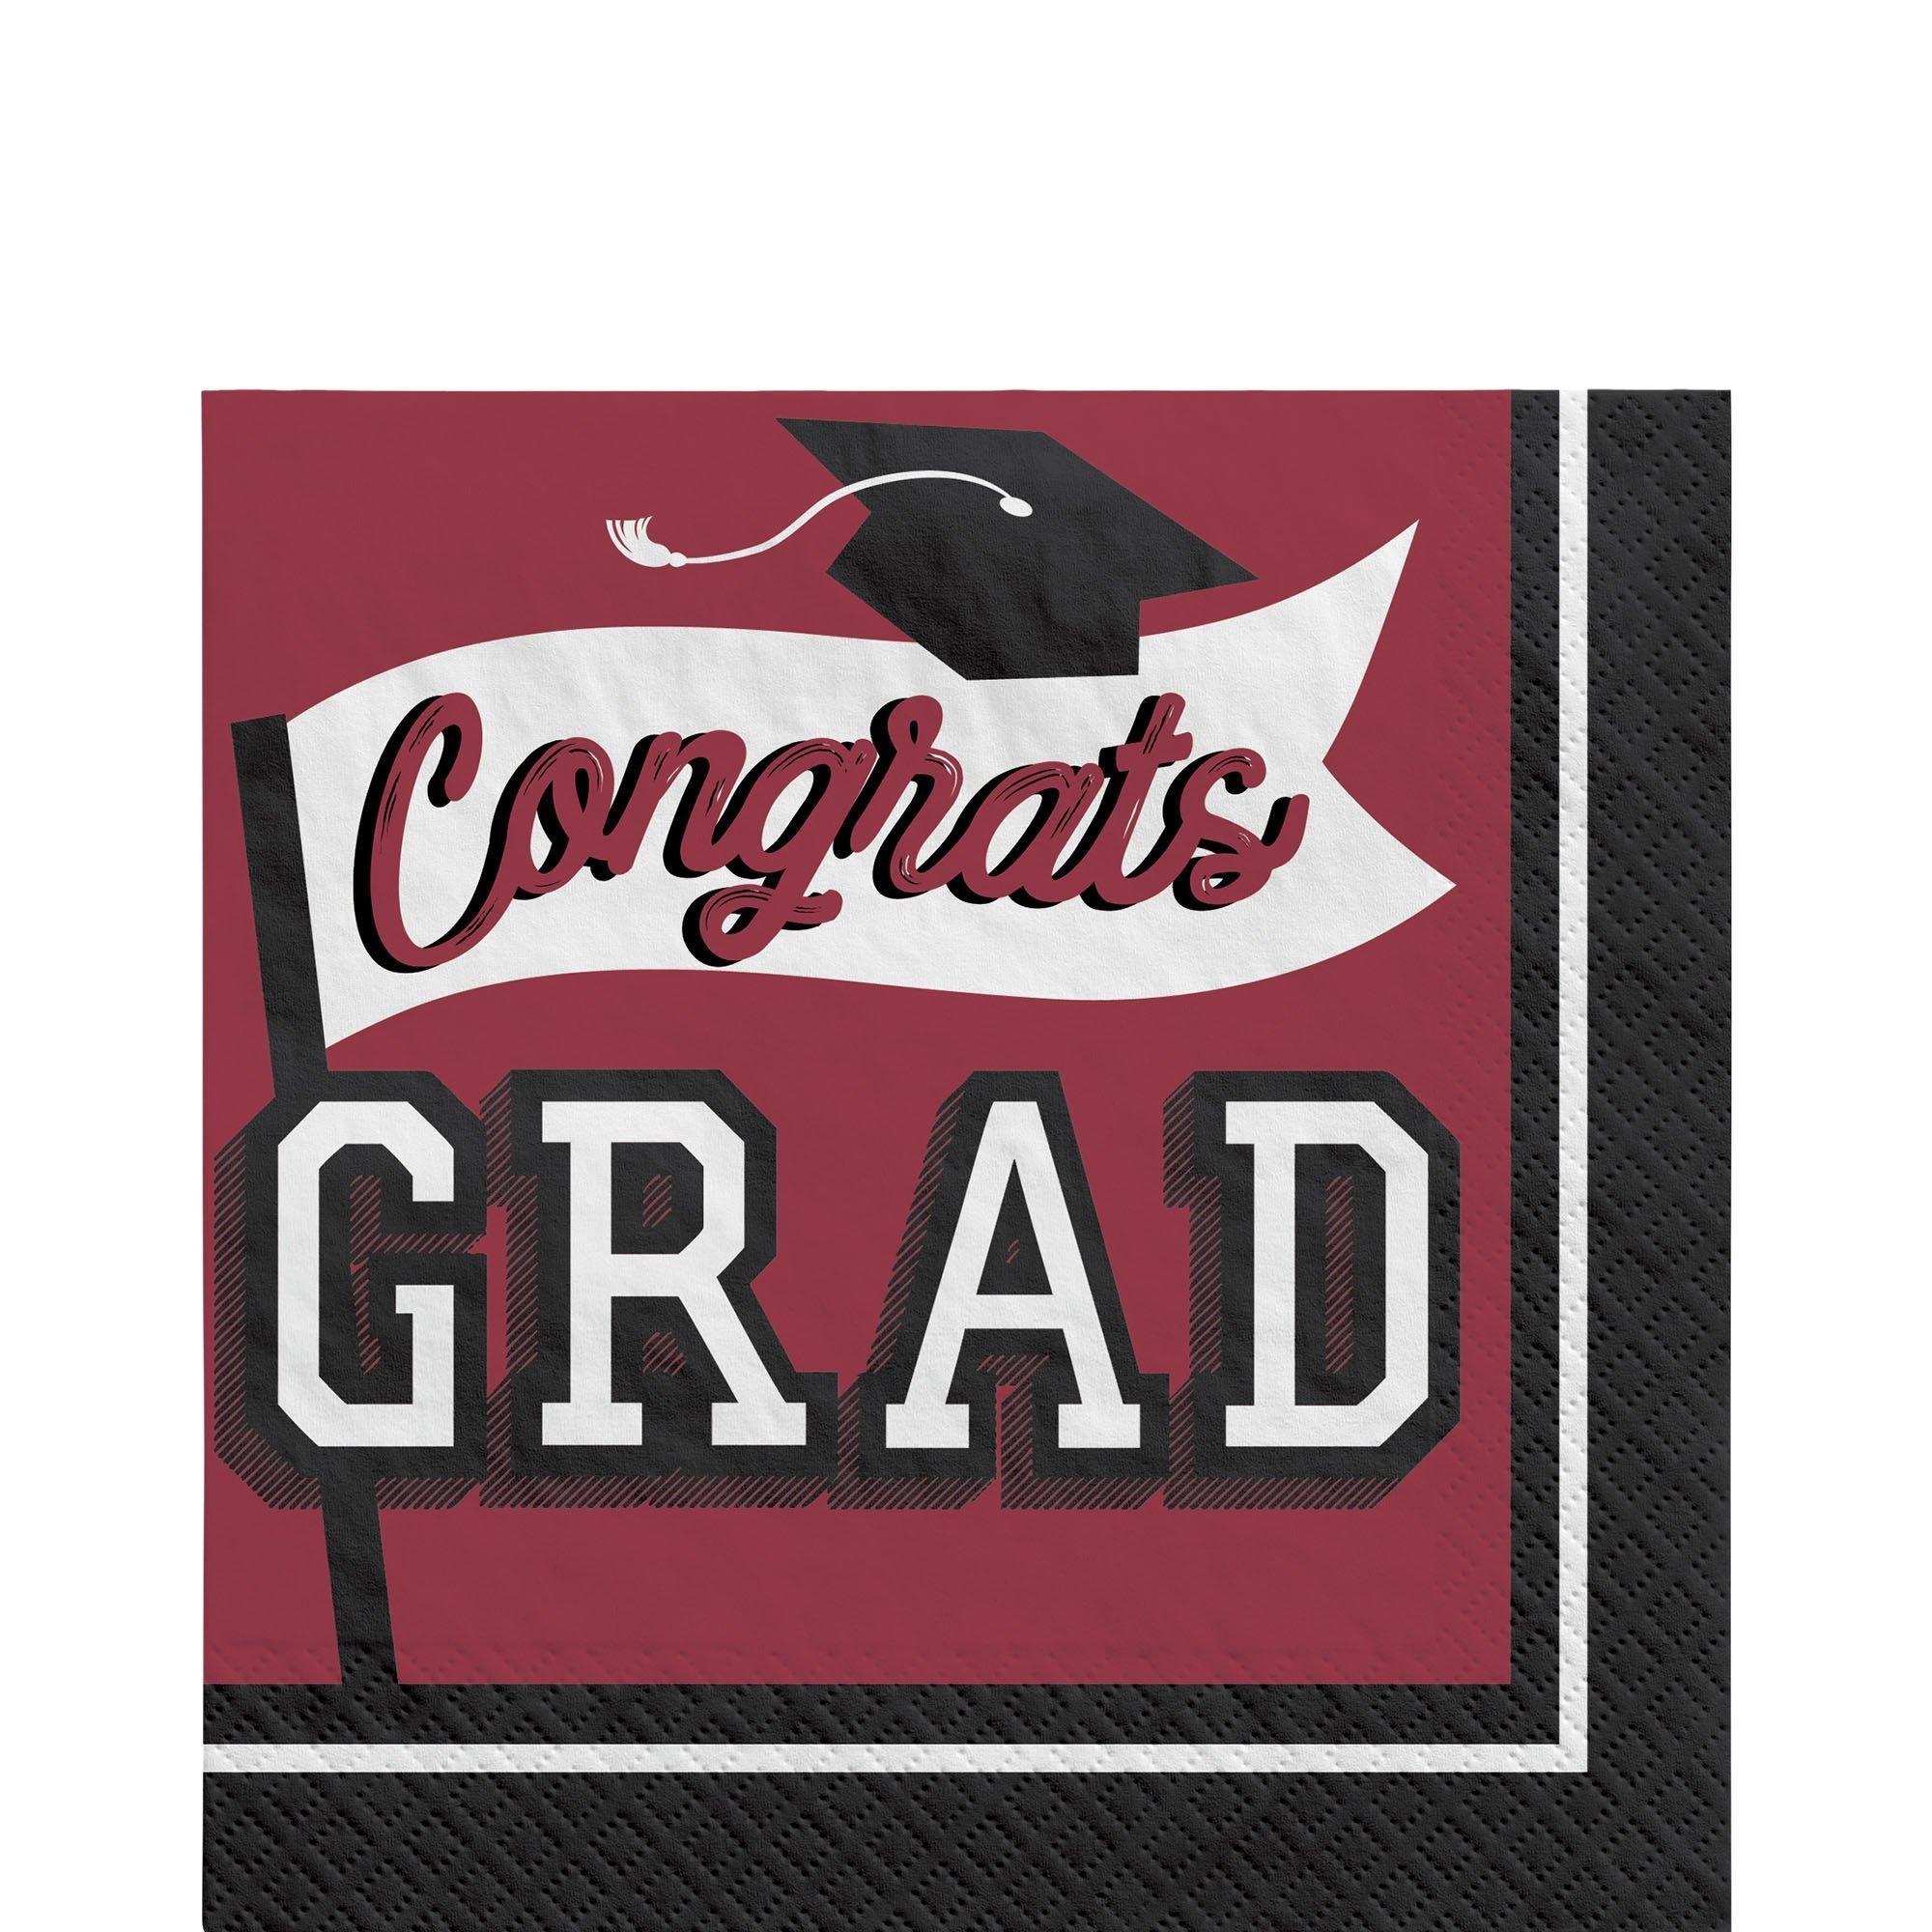 Graduation Party Supplies Kit for 40 with Decorations, Banners, Plates, Napkins, Cups - Maroon Congrats Grad